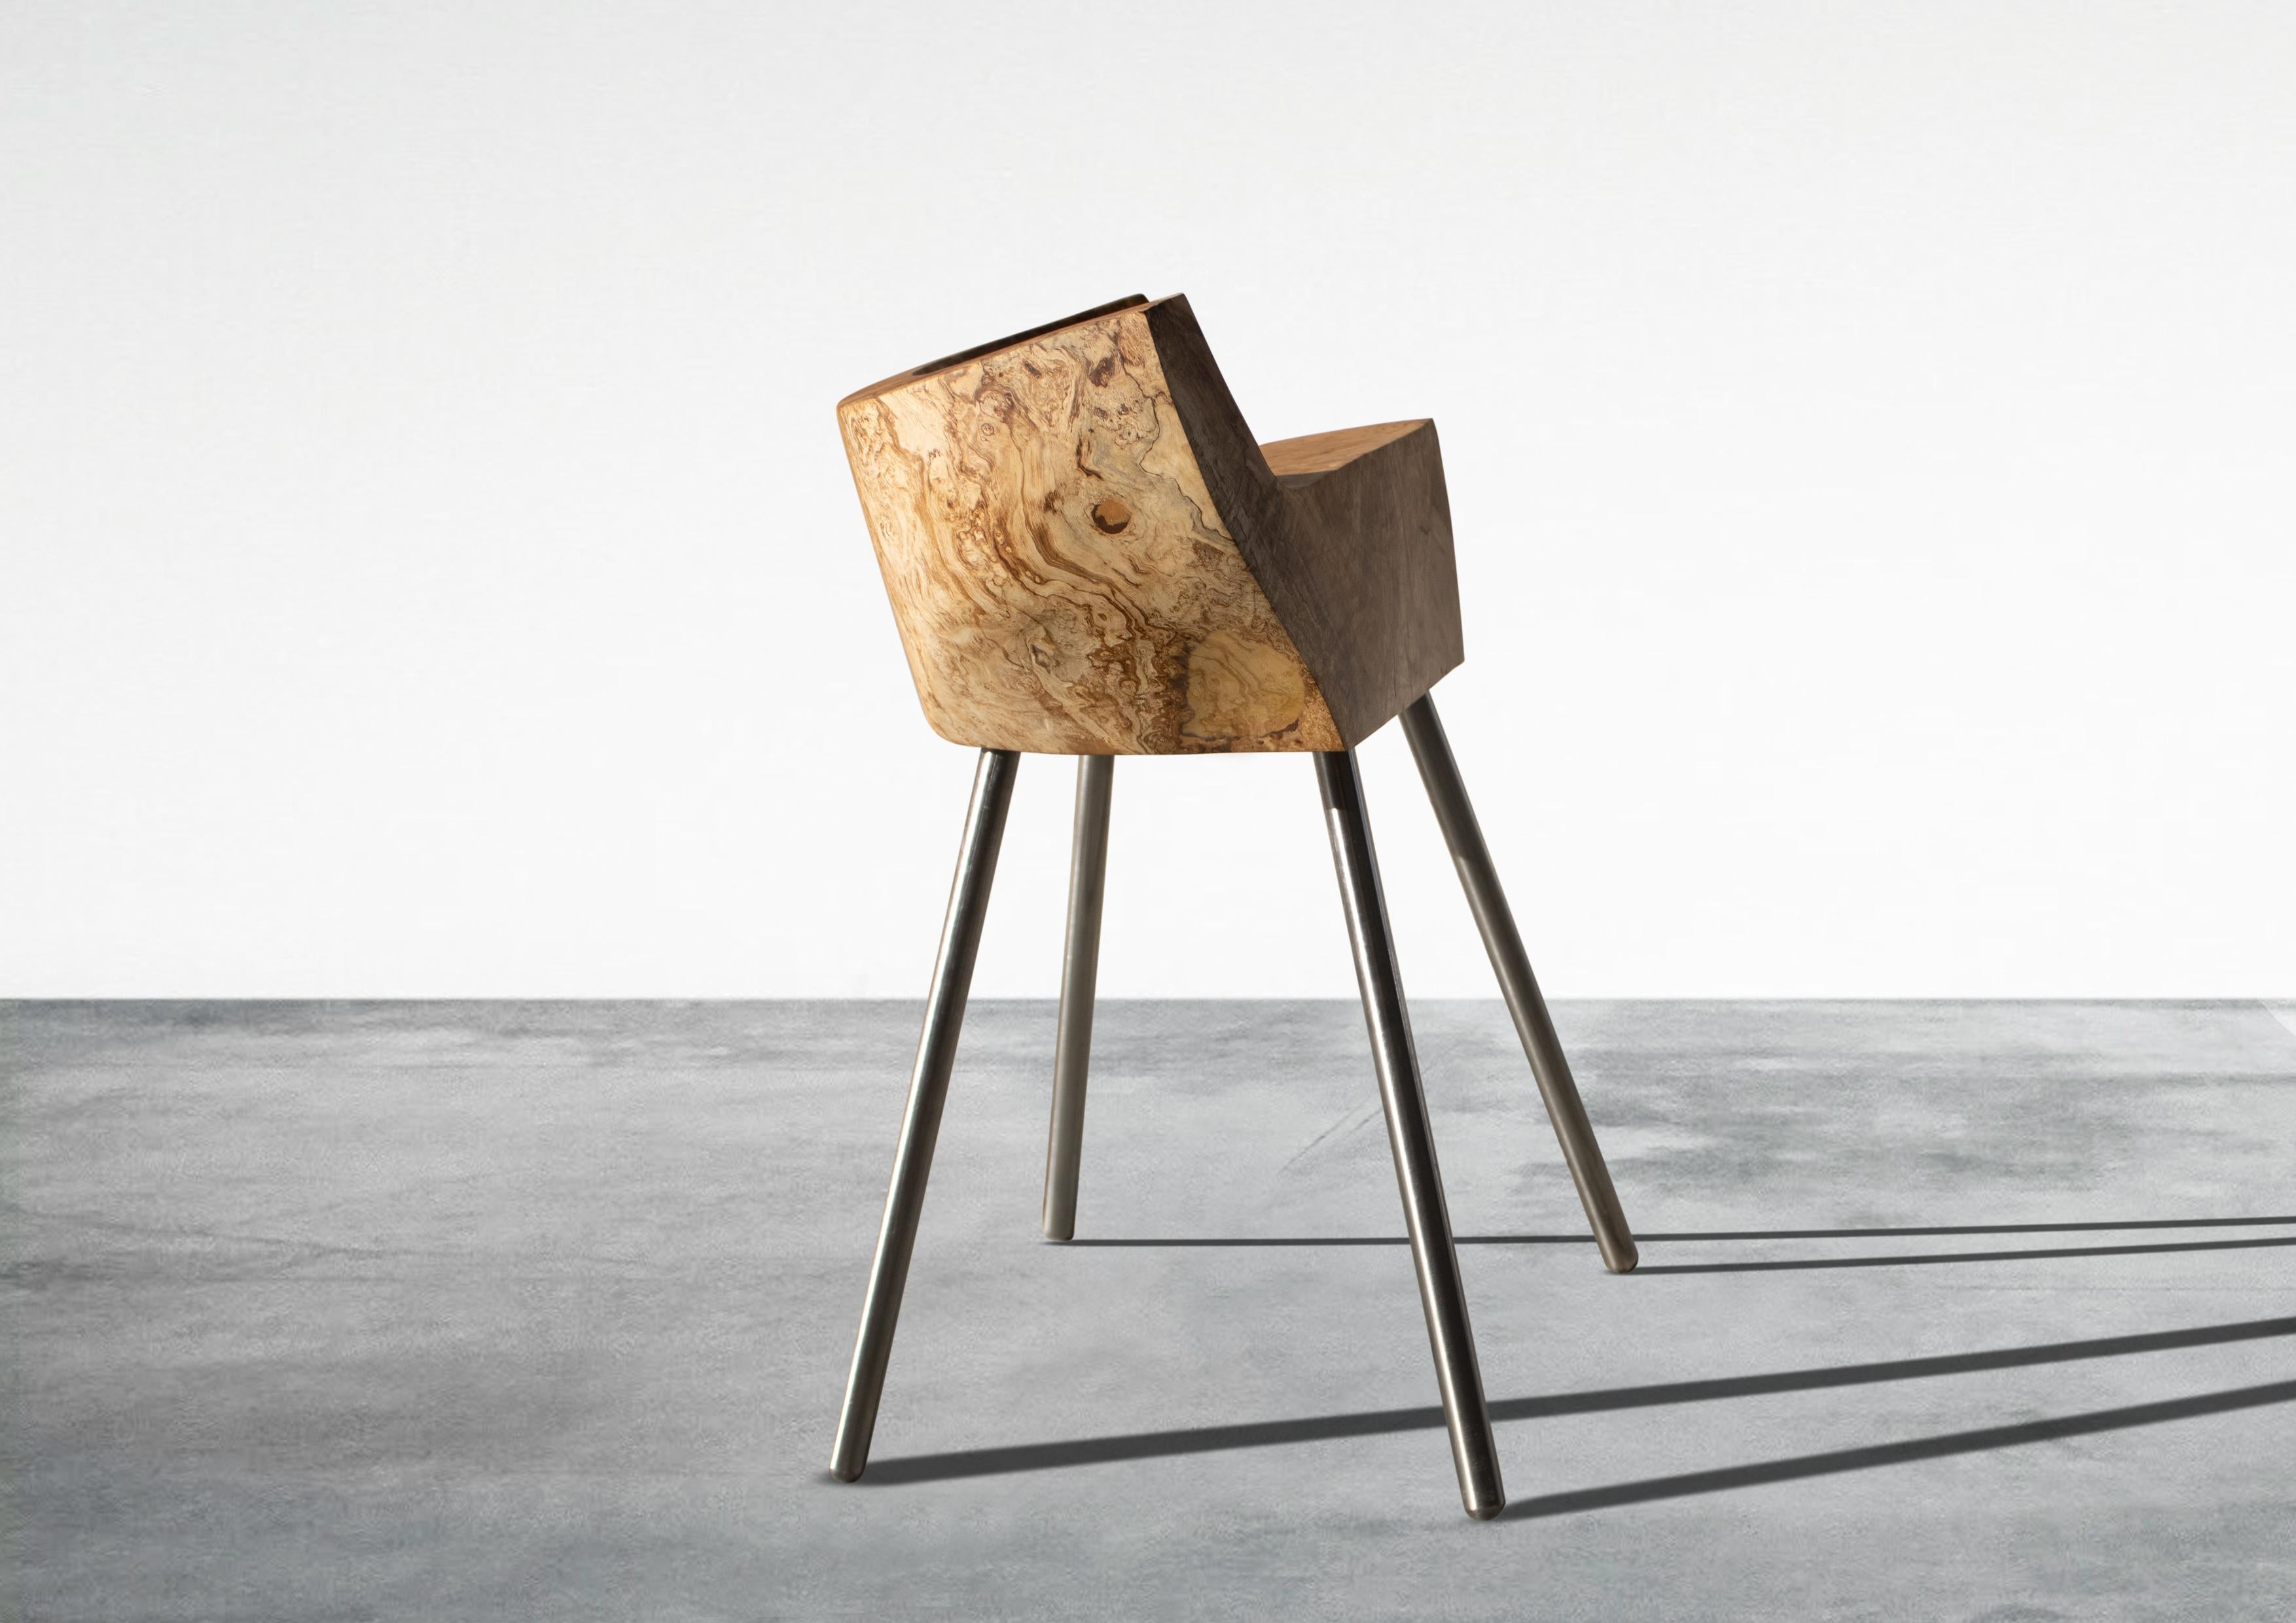 Minos armchair by Woody Fidler
Materials: Olive wood
Dimensions: W 38 x D 25 x H 56 cm
Seat width 28.5 cm
Seat depth 16 cm

Woody Fidler feels honored to live in a country where olive growing dates back to 4000 BC, as documented in Minoan